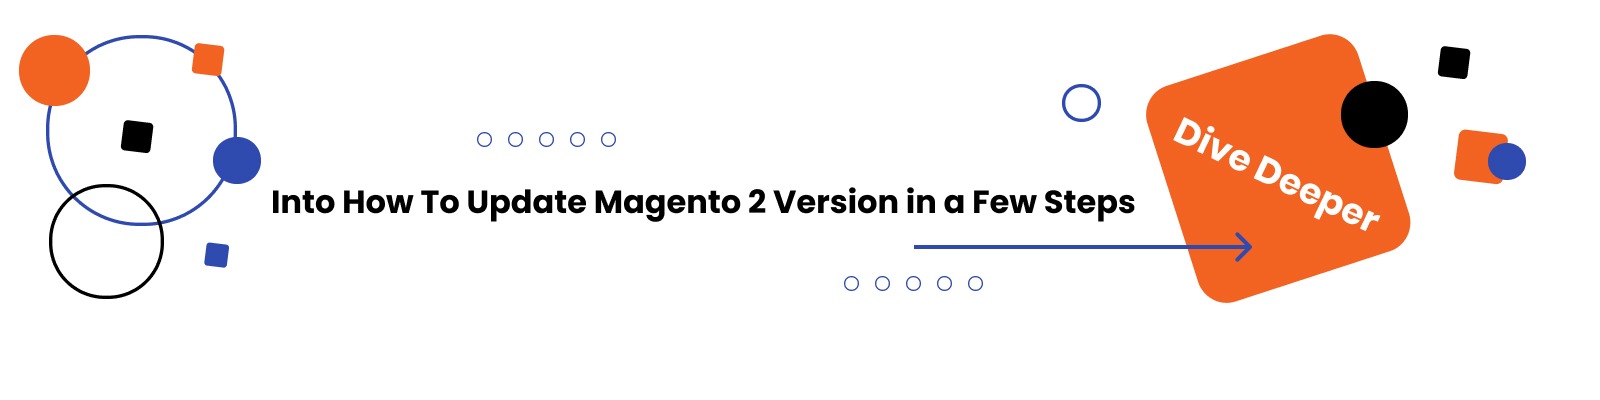 How To Update Magento 2 Version in a Few Steps